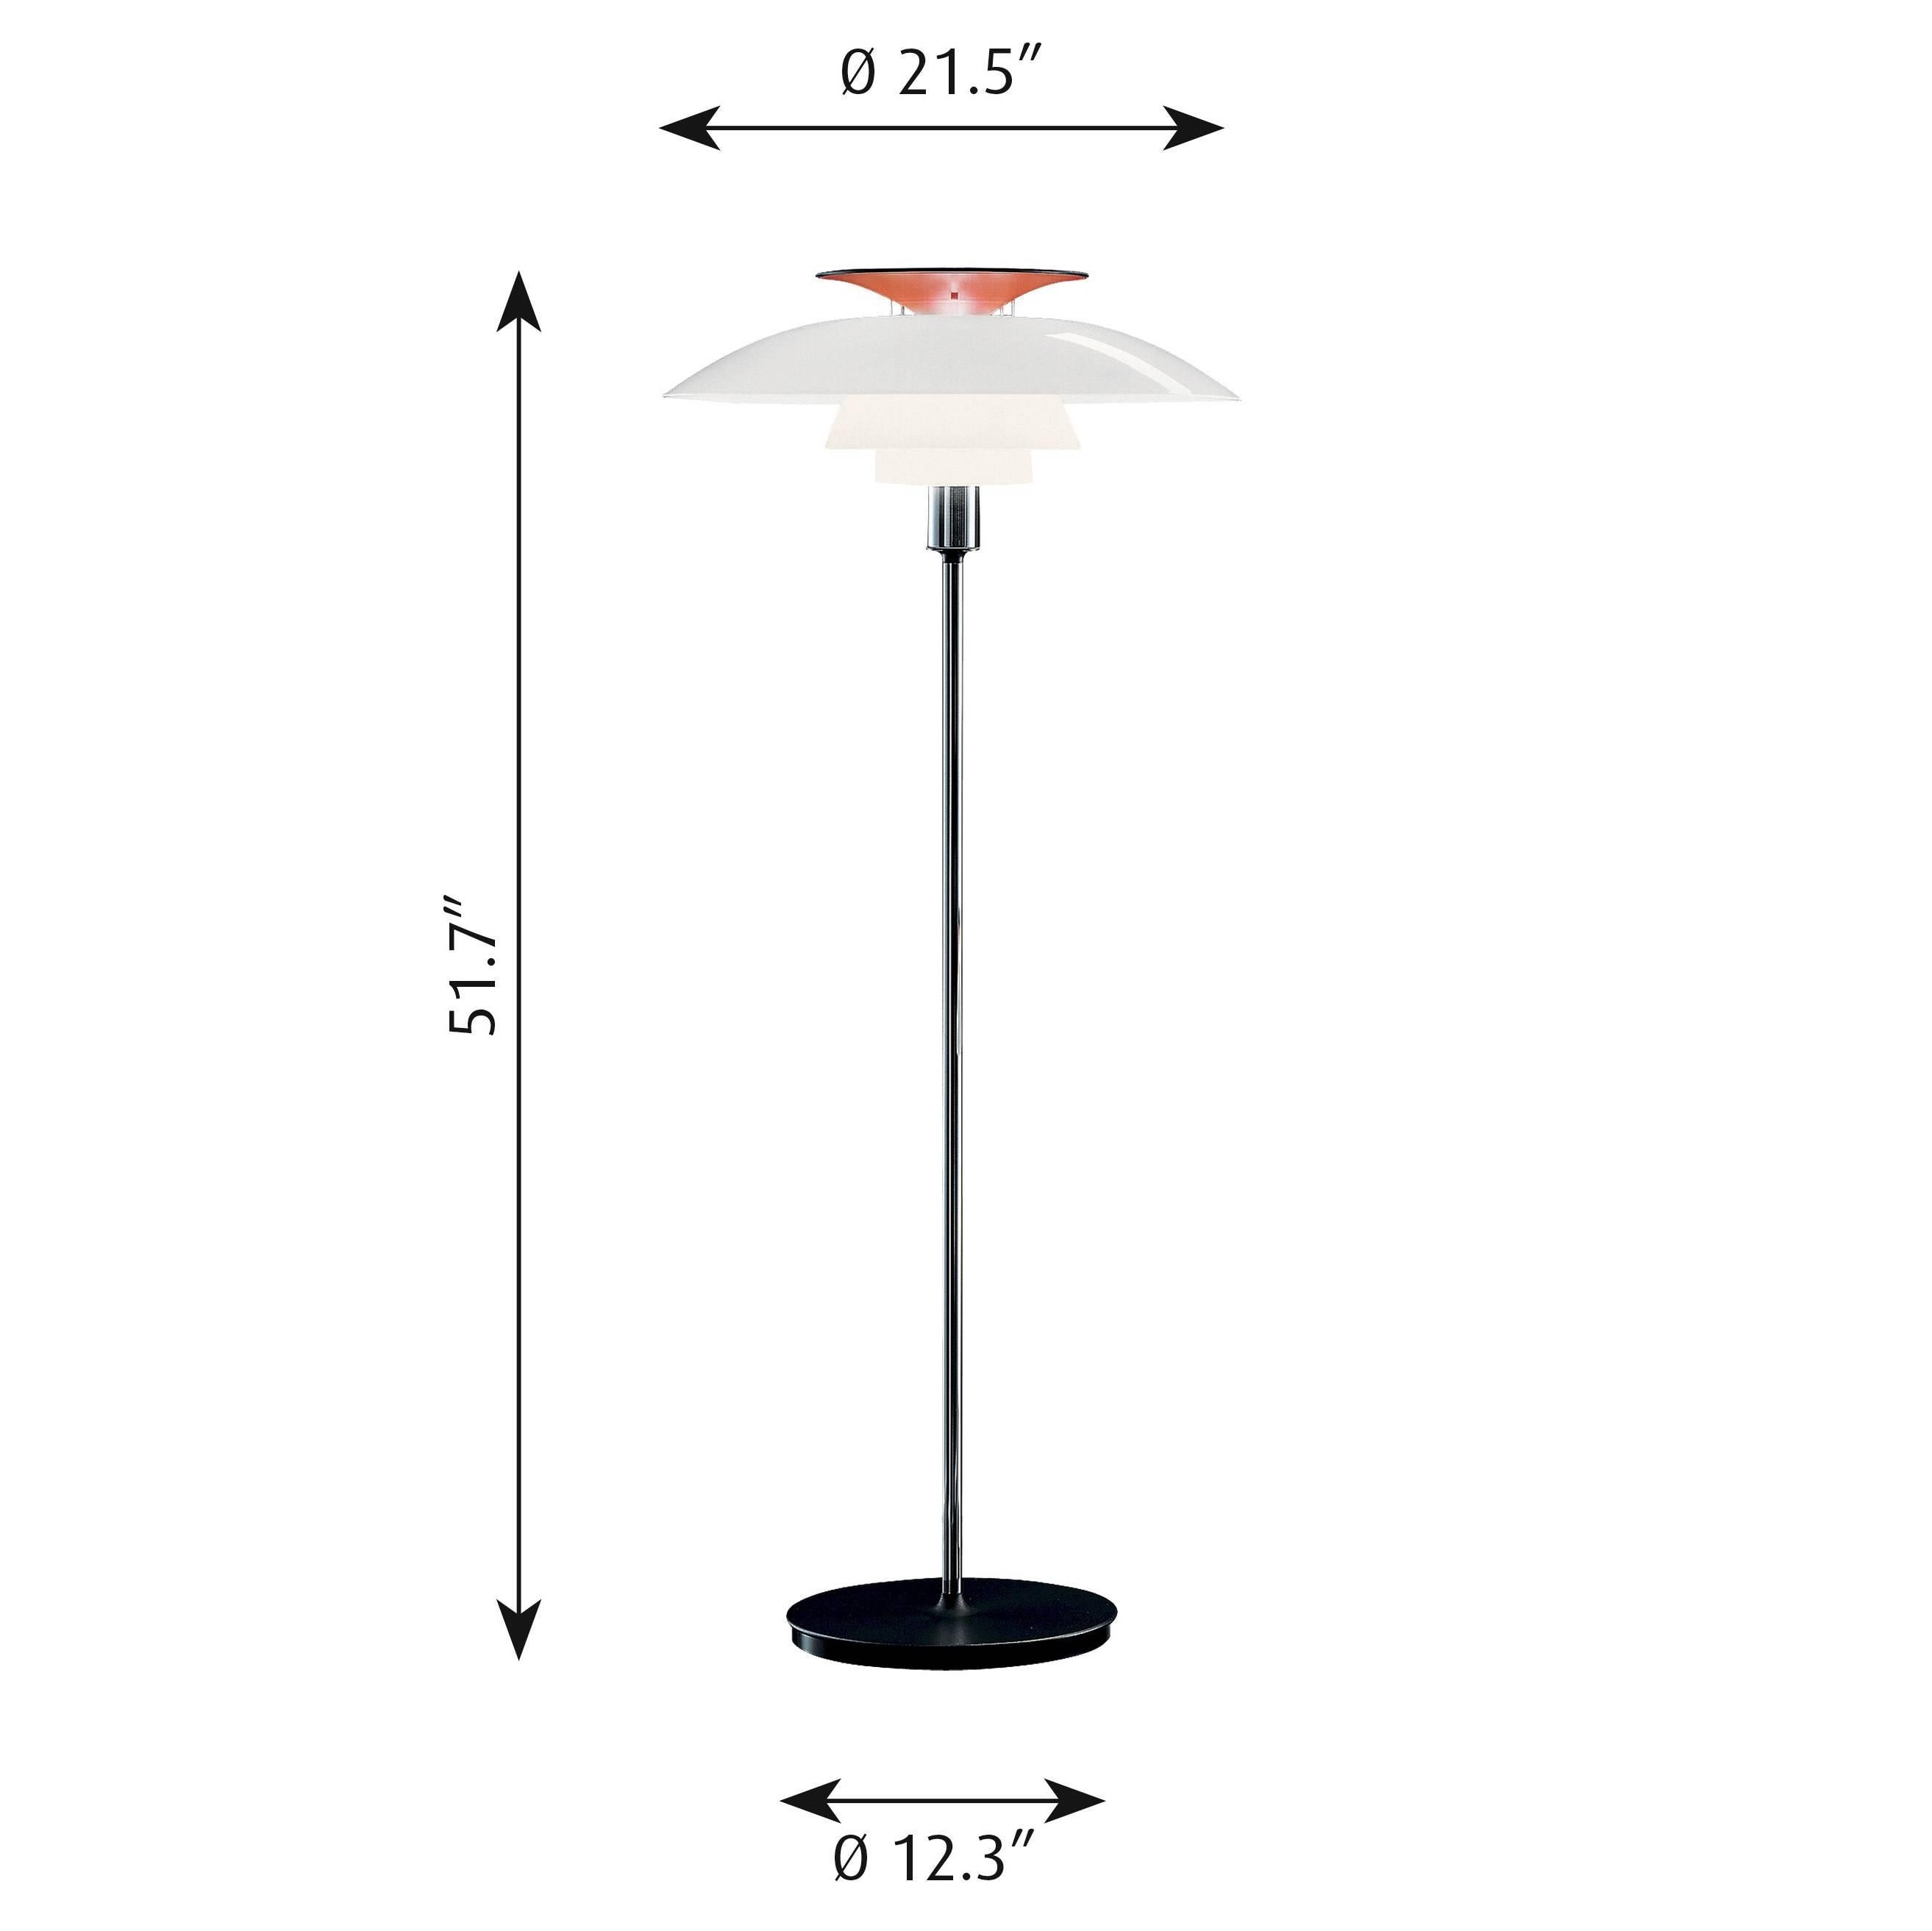 Poul Henningsen PH 80 floor lamp for Louis Poulsen. The PH 80 was put into production after Henningsen's death, as a celebration of what would have been his 80th birthday. A designer focused on the future, Henningsen had been working with plastic